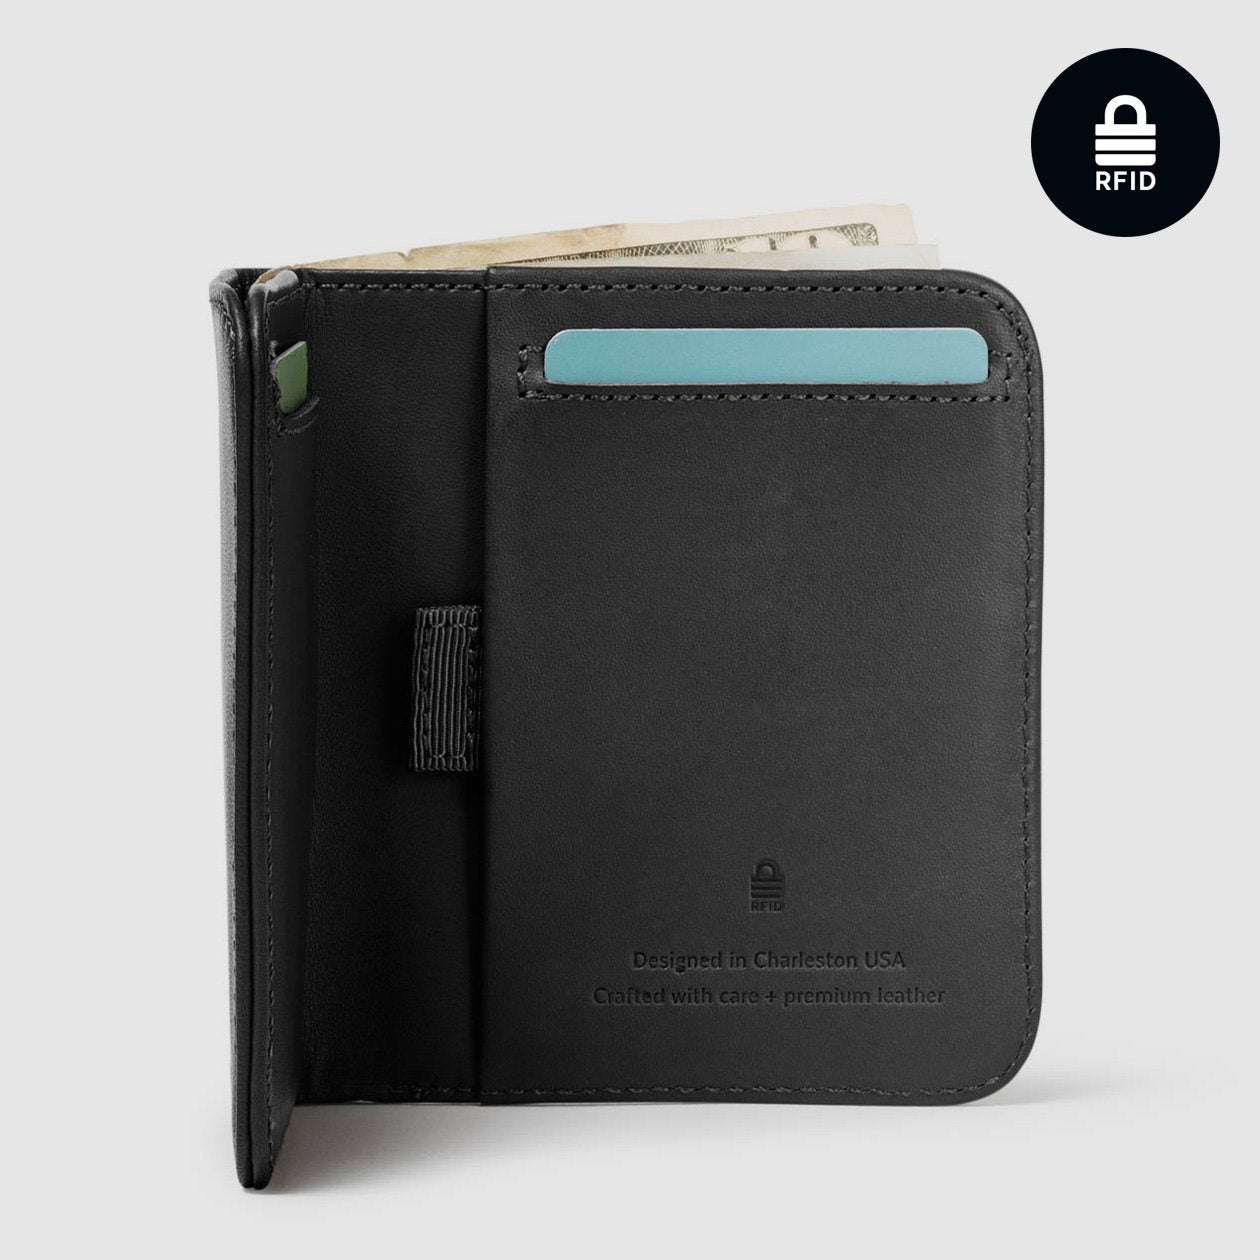 opened distil ink black billfold wallet with rfid protection, a card and paper bill protruding